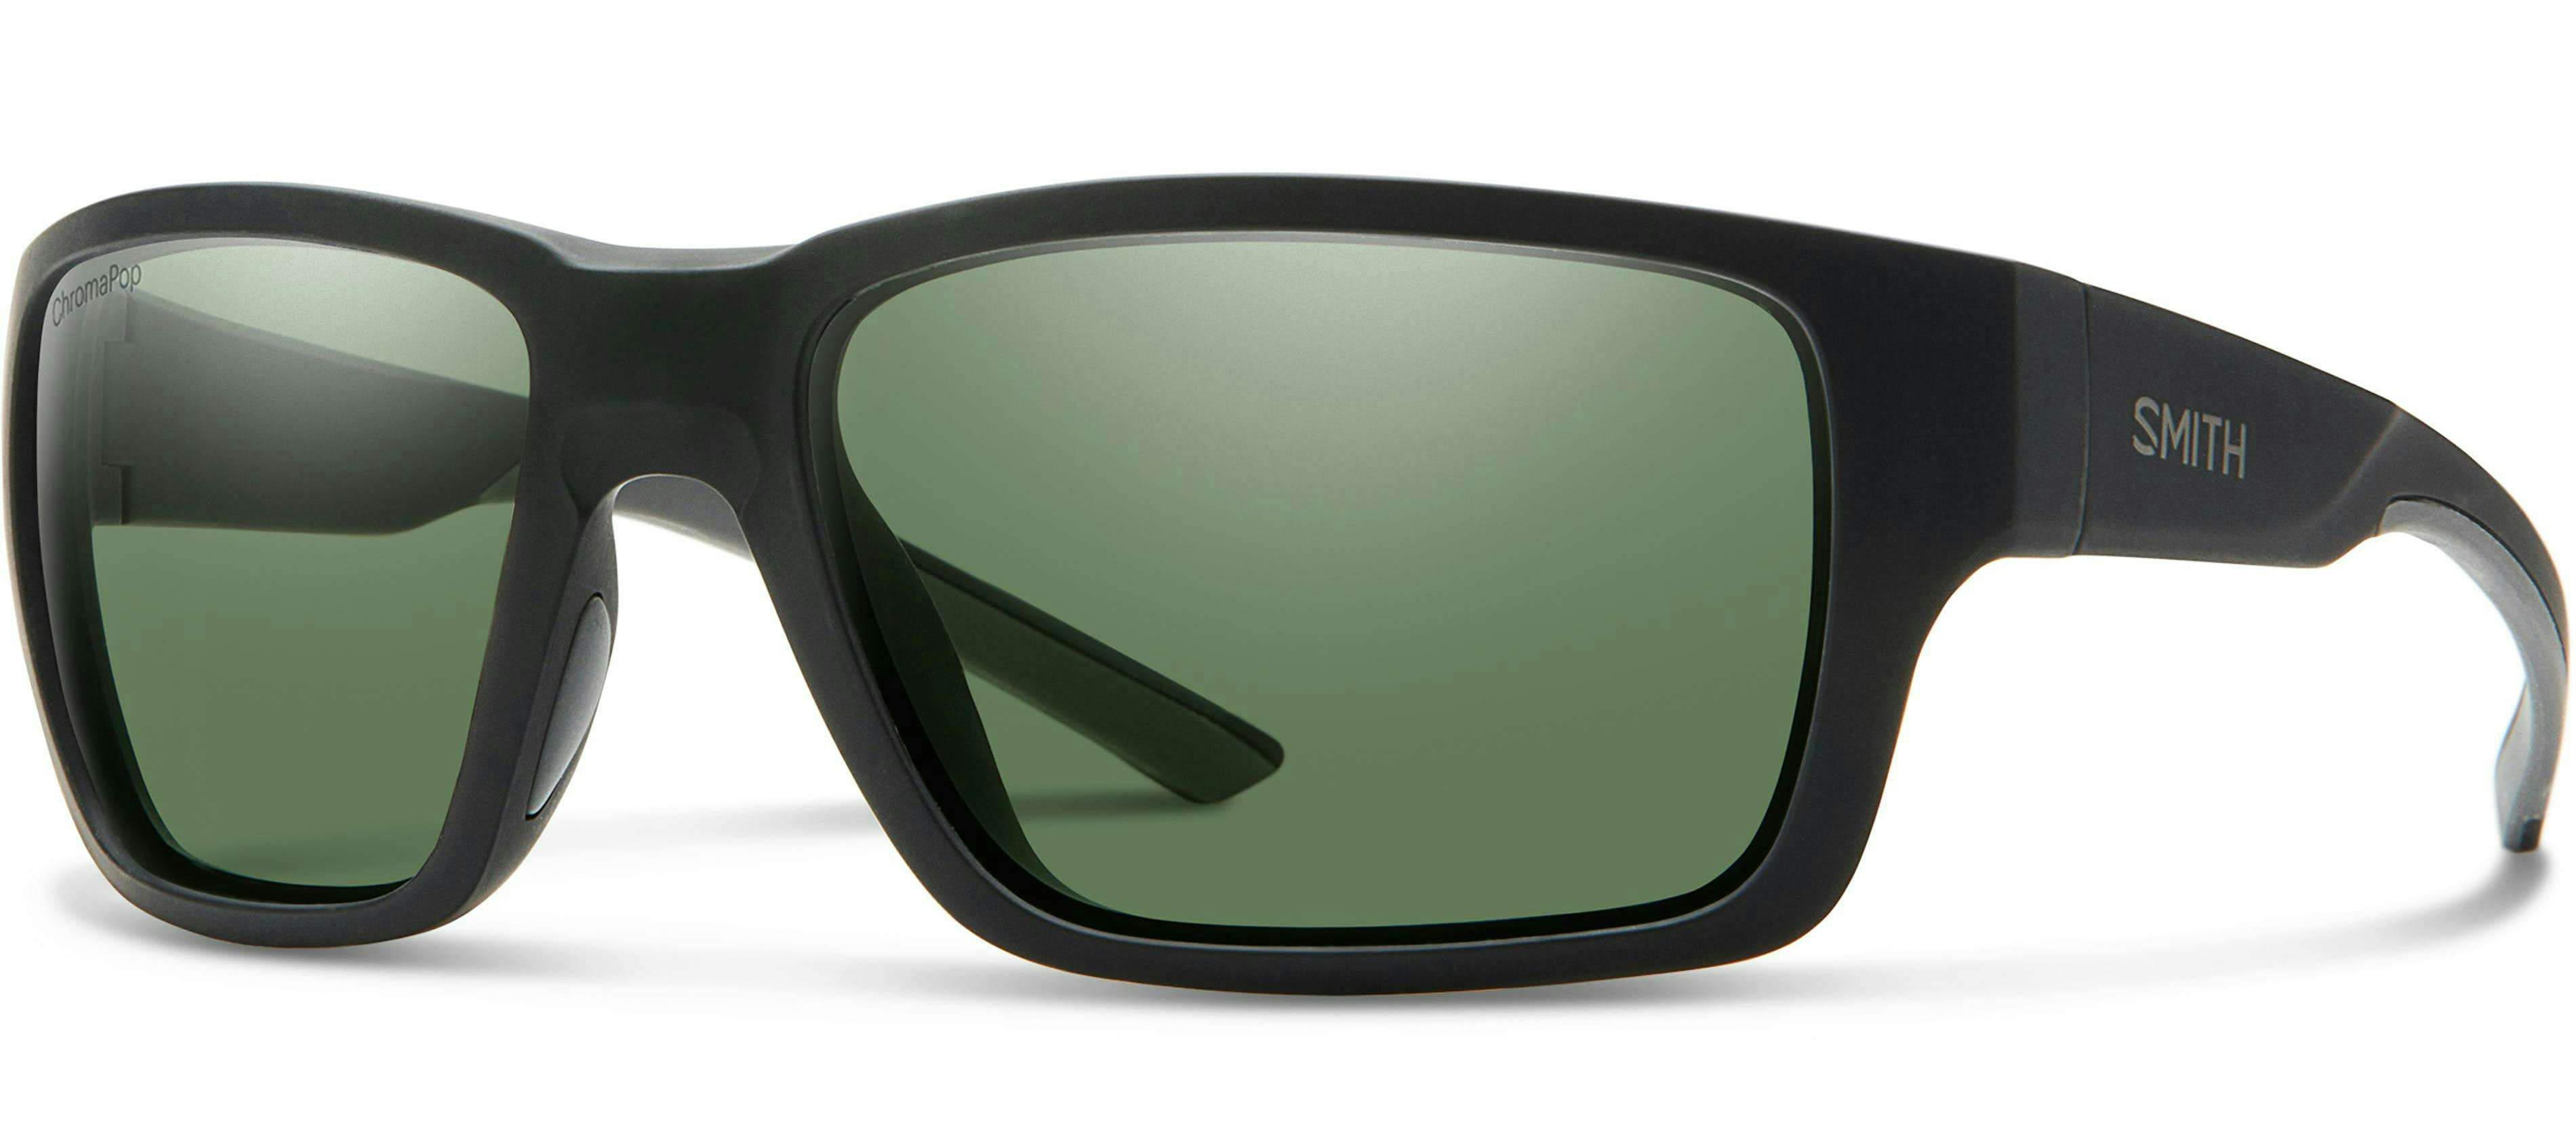 Smith Outback glasses